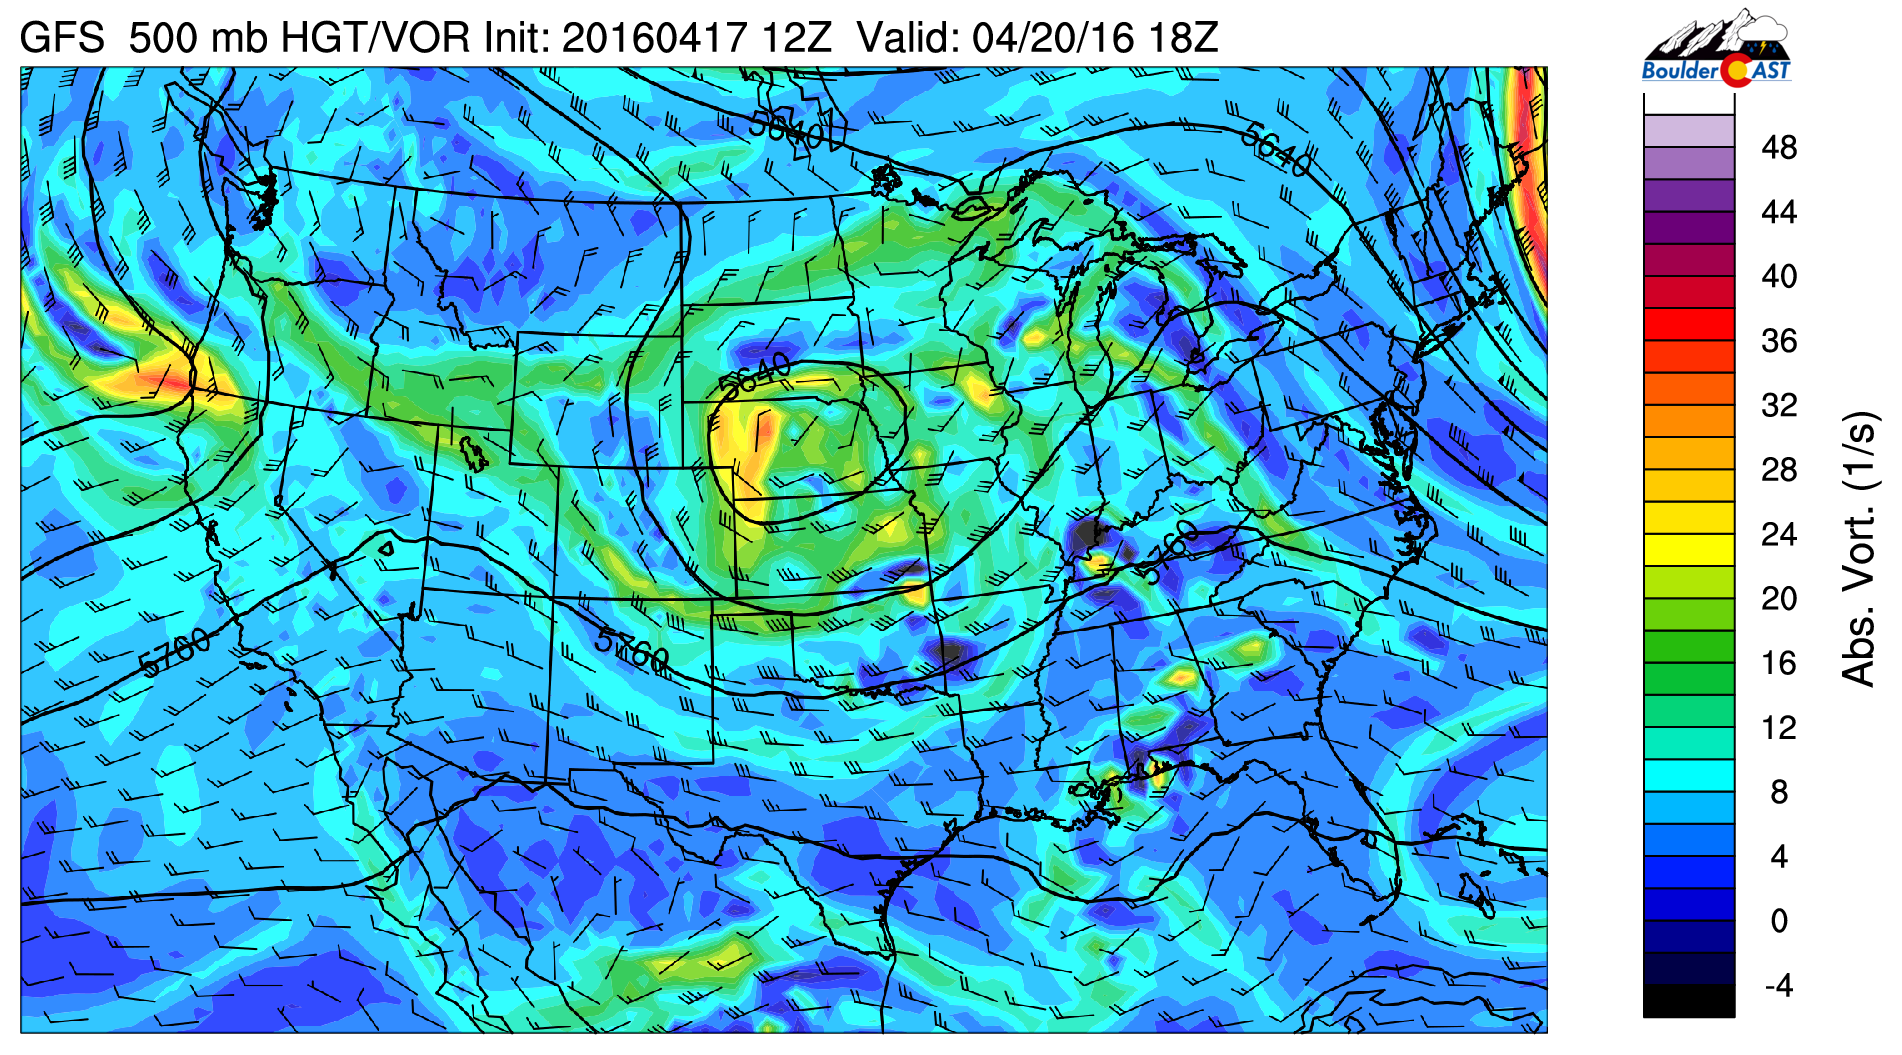 GFS 500 mb vorticity for Wednesday